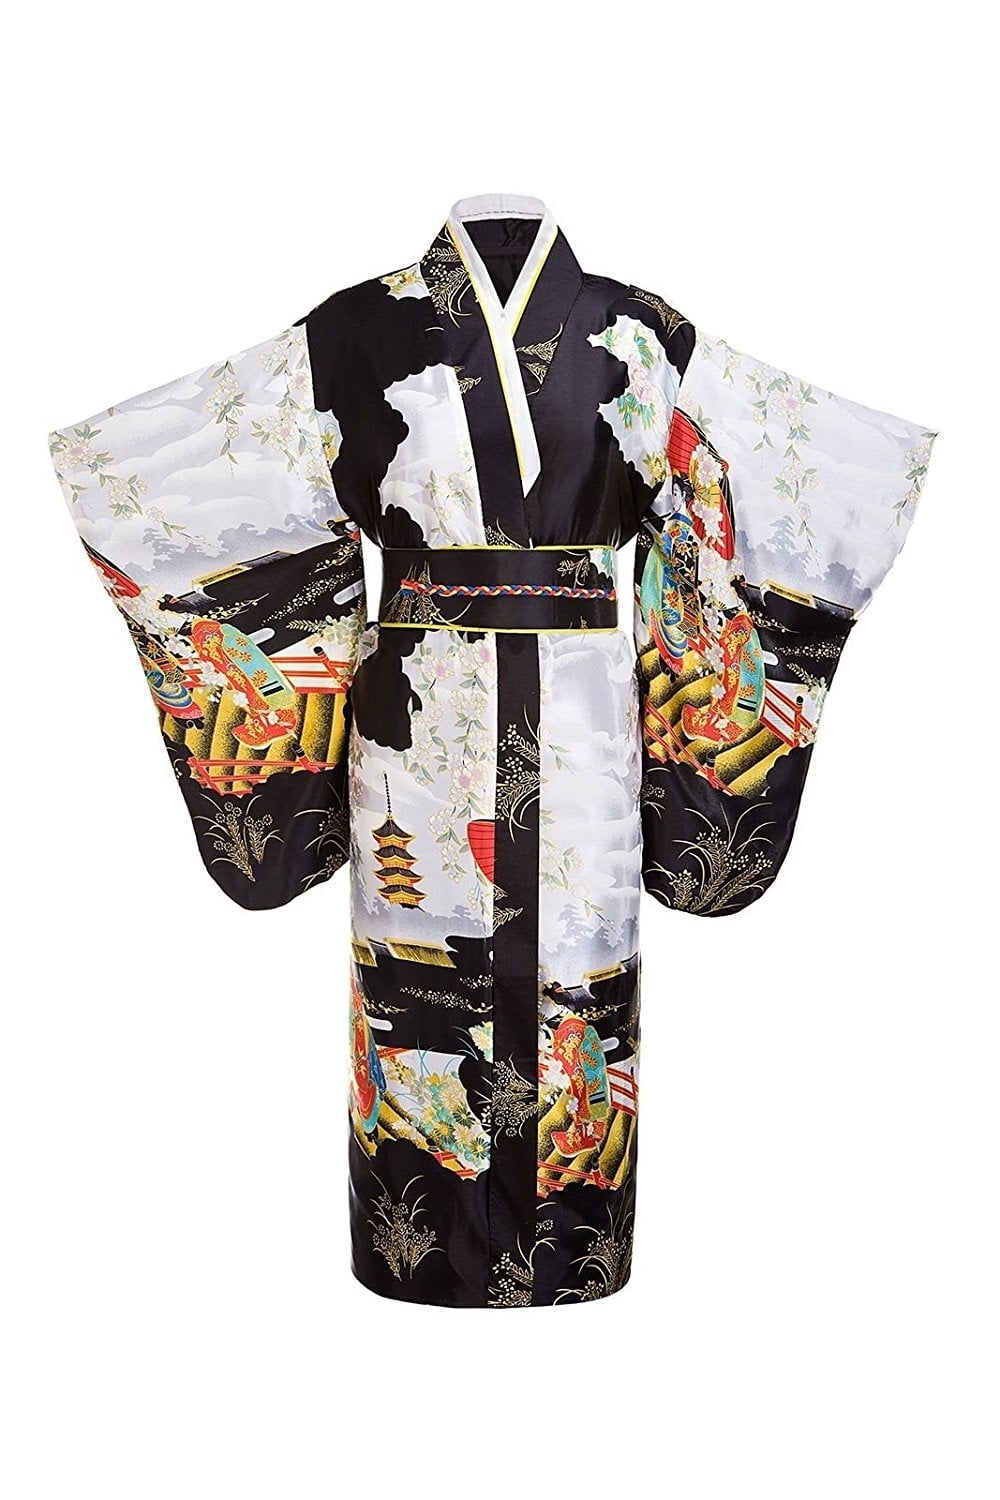 Japanese Silk Robes Thy Collectibles - thechelseatile